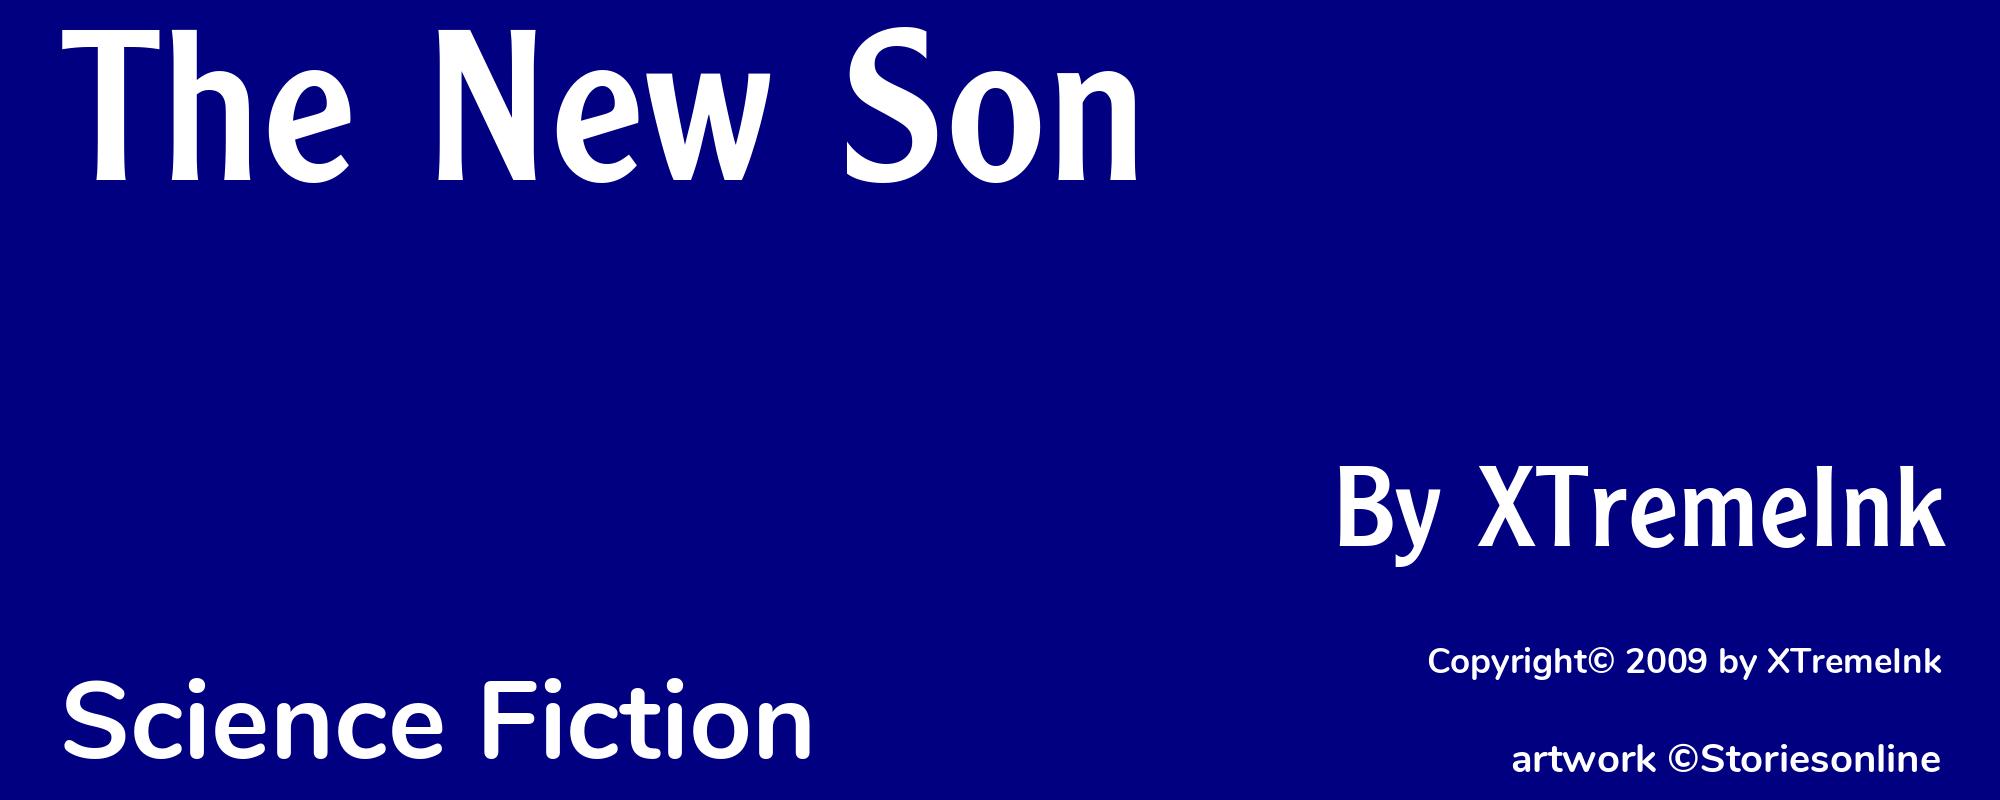 The New Son - Cover